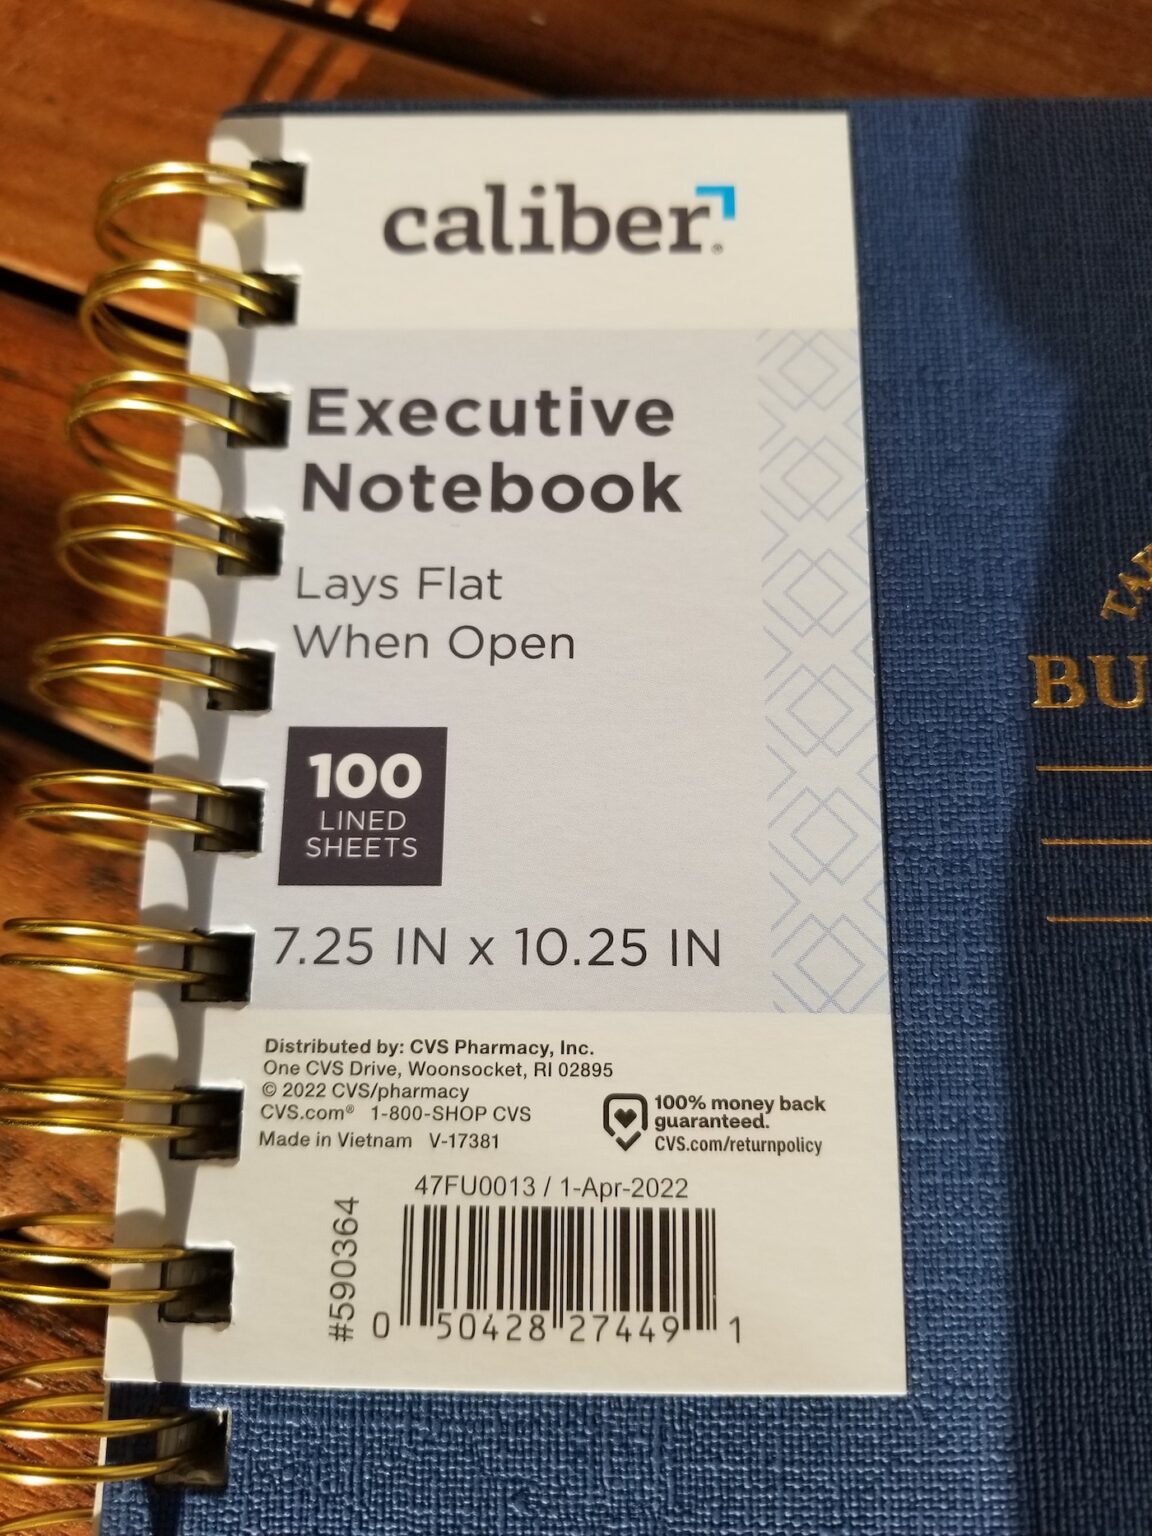 A Quick Look at the Caliber Executive Notebook from CVS Chicana Writes